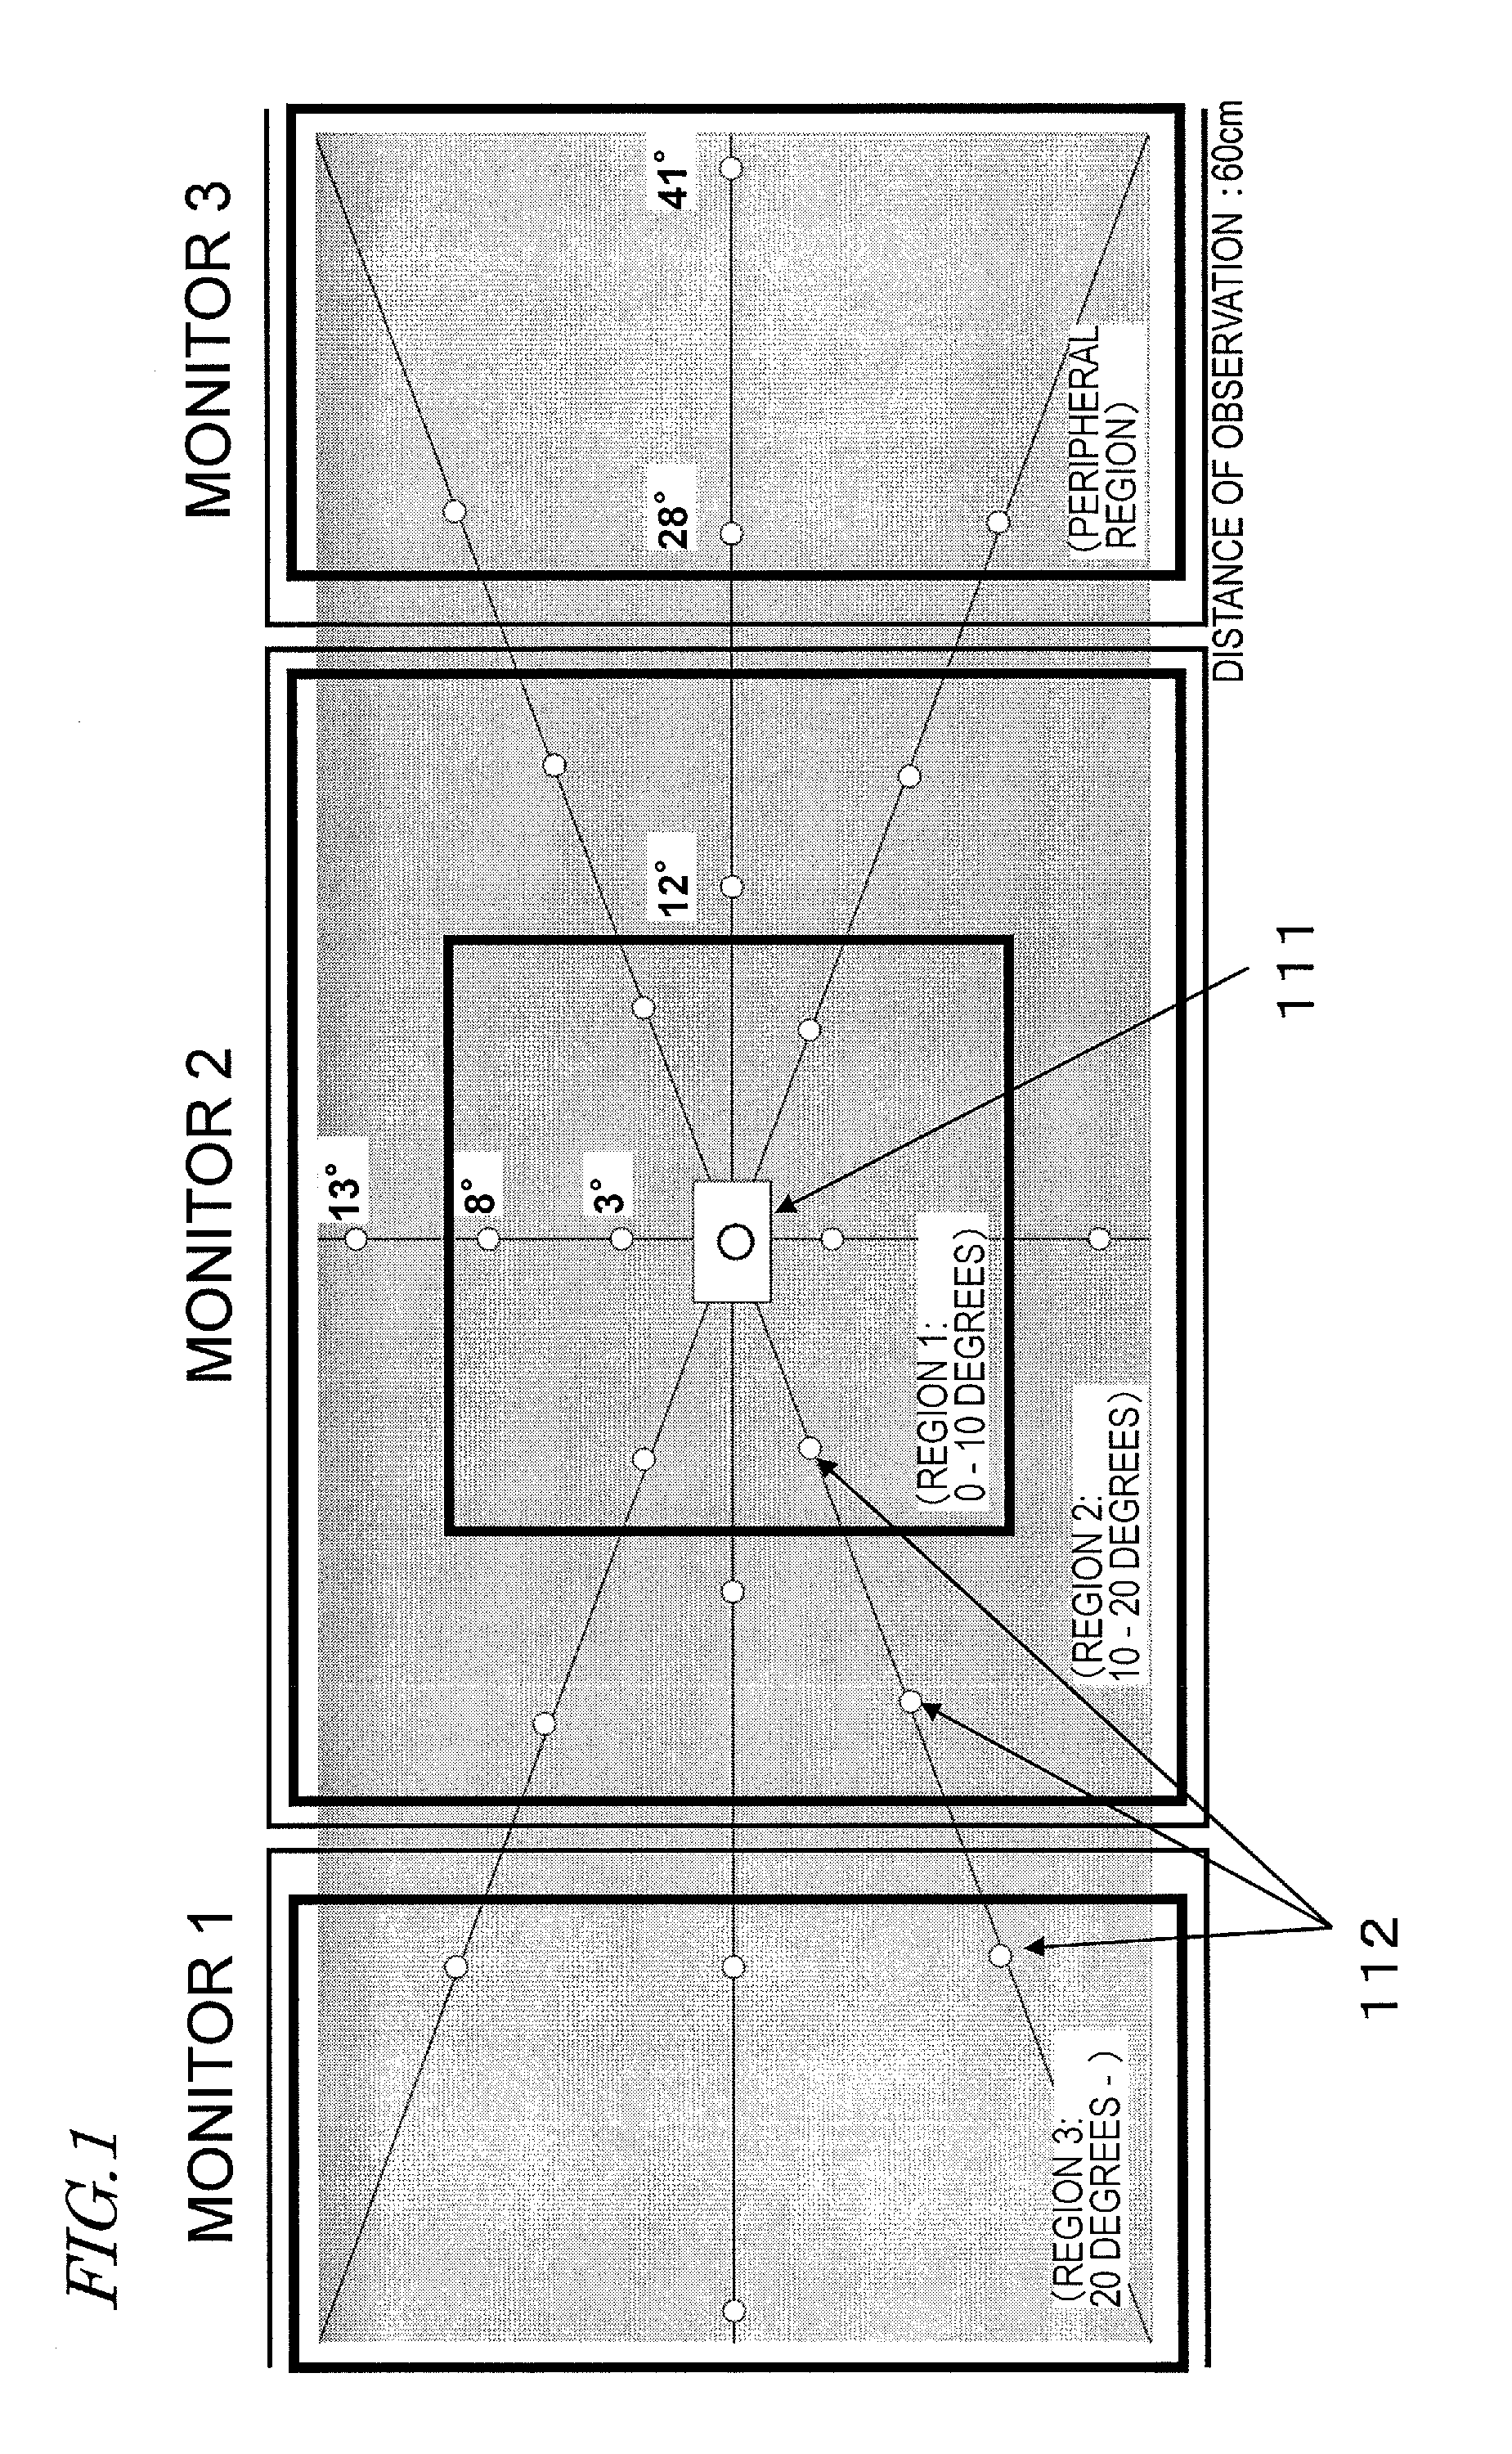 Driving attention amount determination device, method, and computer program